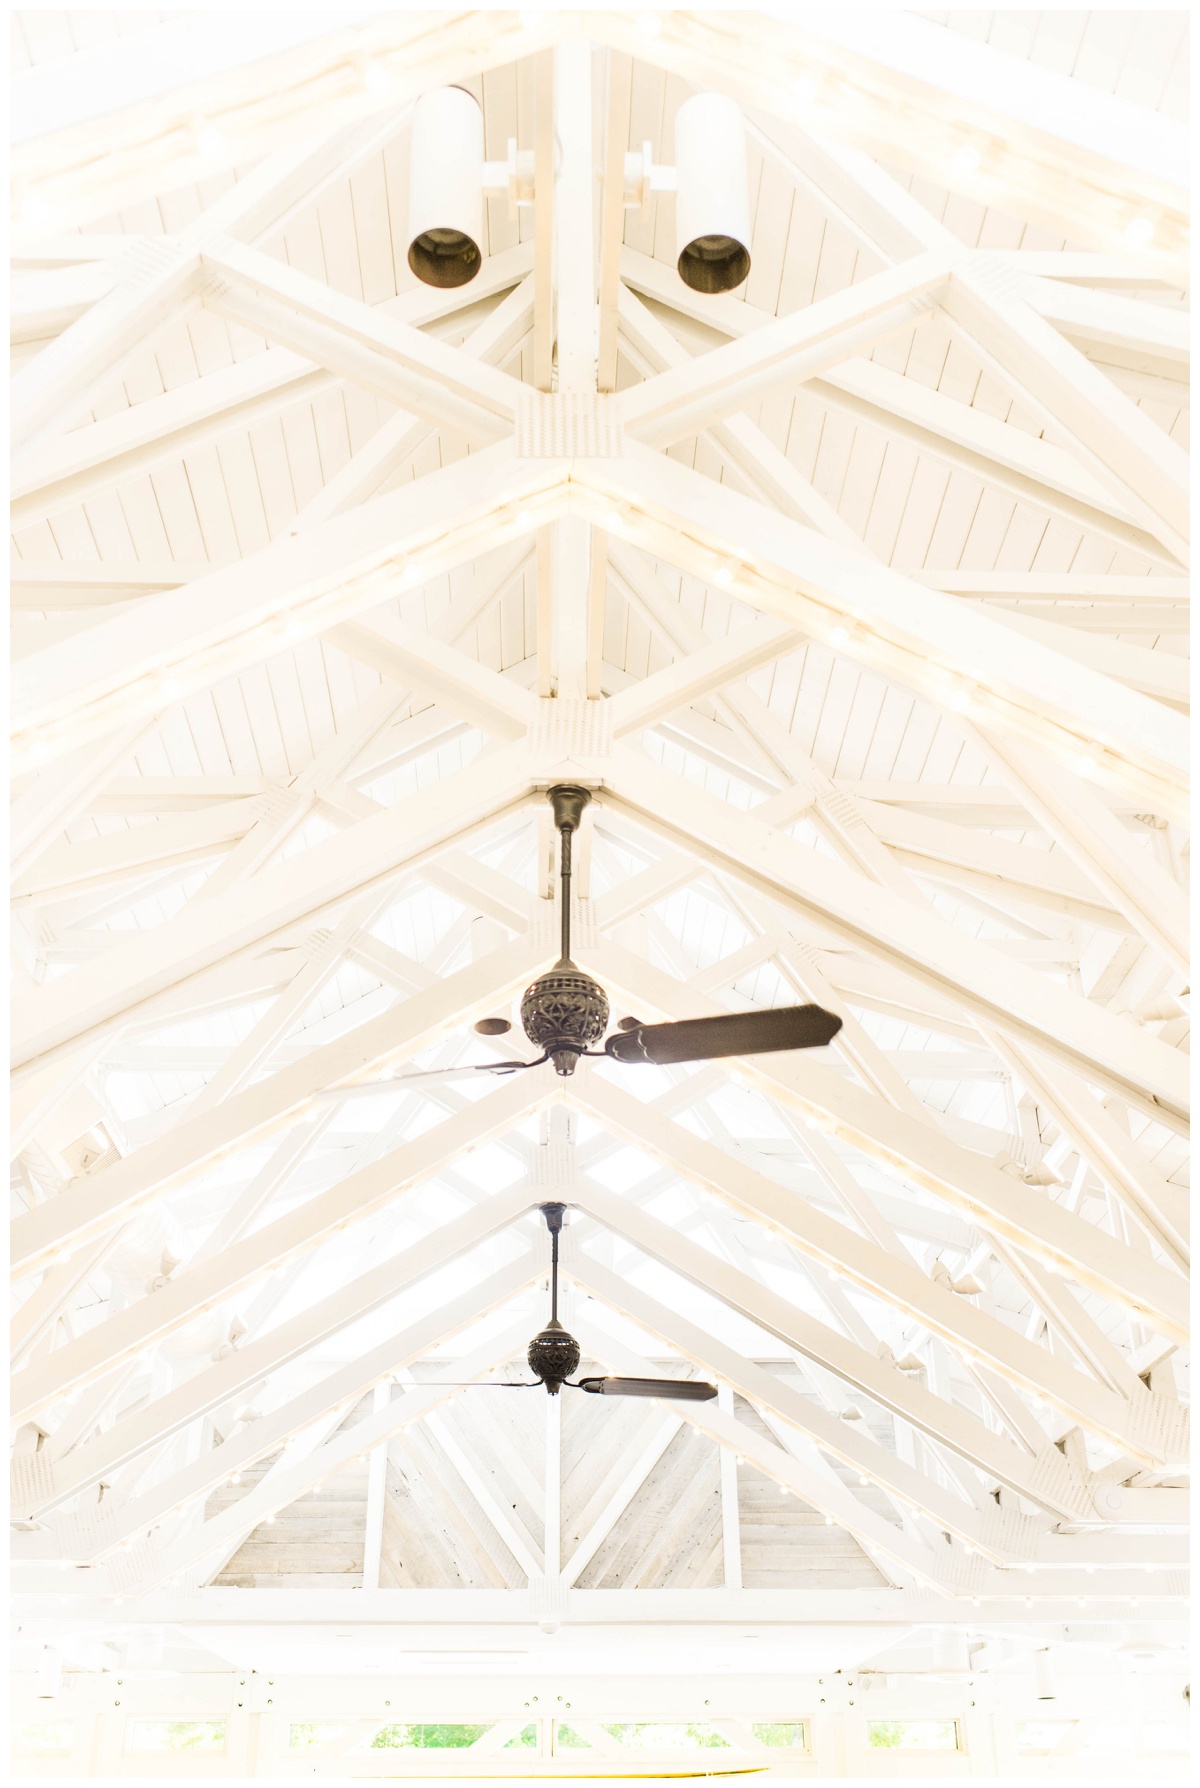 the boathouse at sunday park richmond virginia waterfront wedding venue outdoor wedding venue sailboats golden hour photo inspiration inside architecture white beams fans southern wedding venue by rva wedding photographer sarah & dave photography